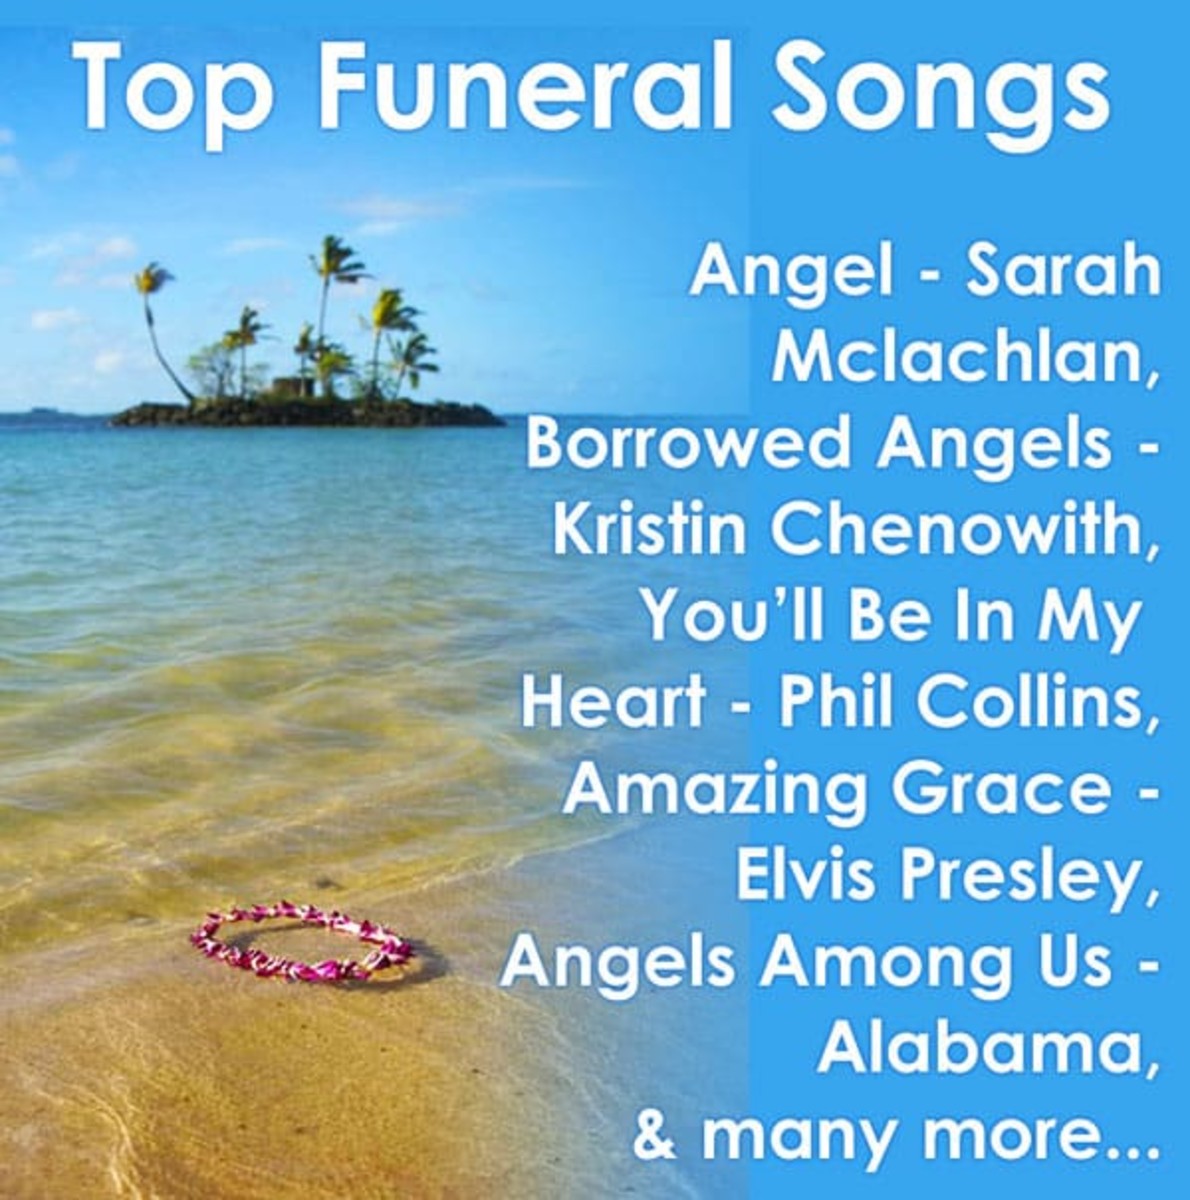 100 Uplifting Funeral Songs for Older Generation (2022)